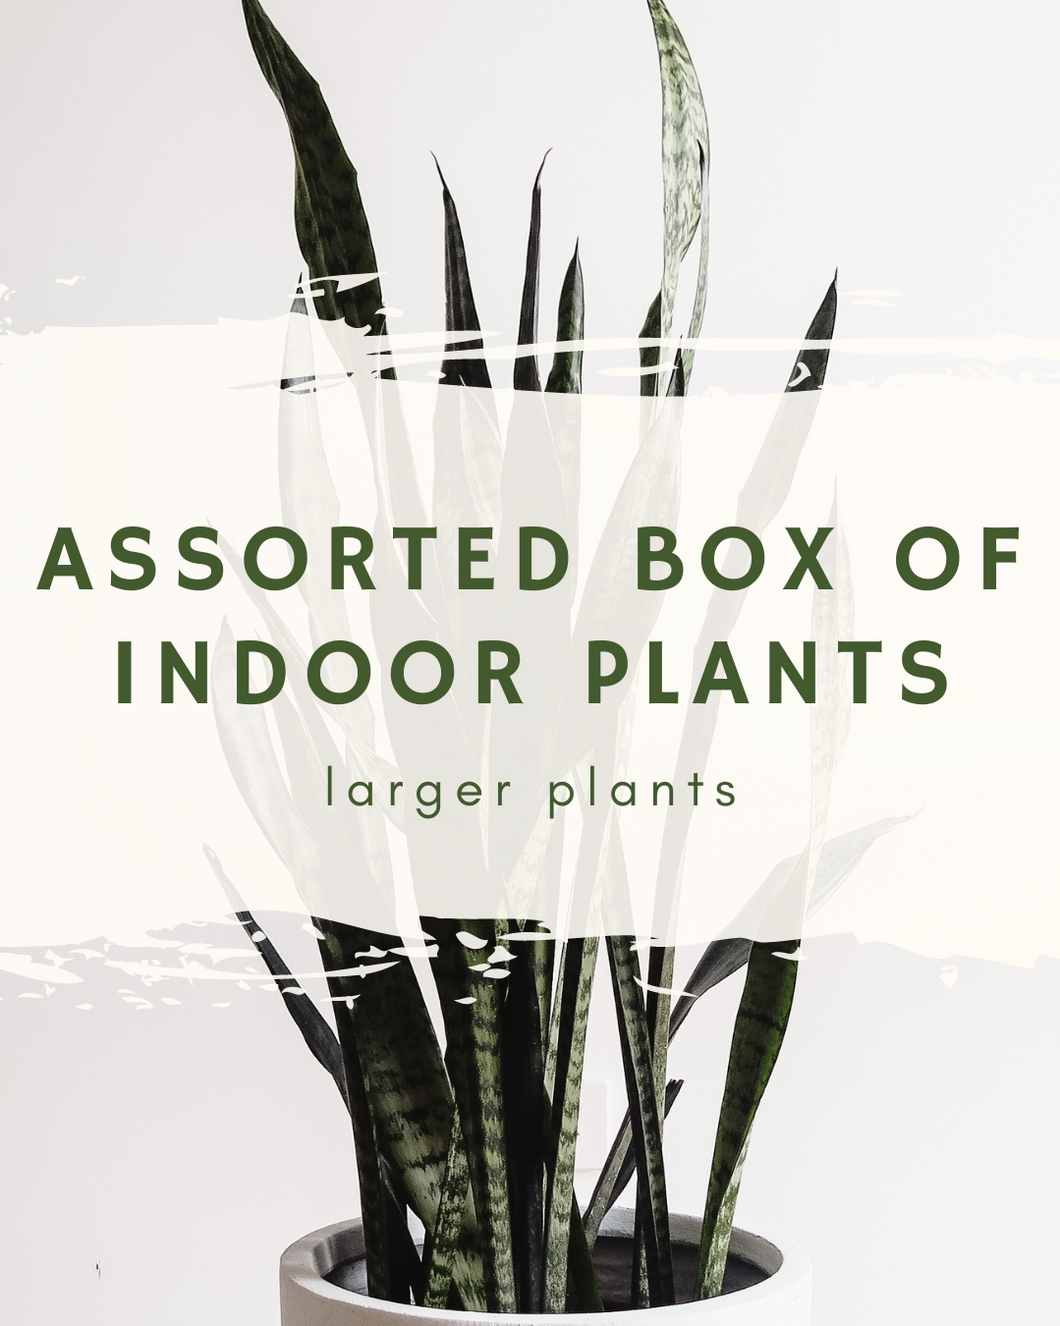 Assorted Box of Indoor Plants - larger plants